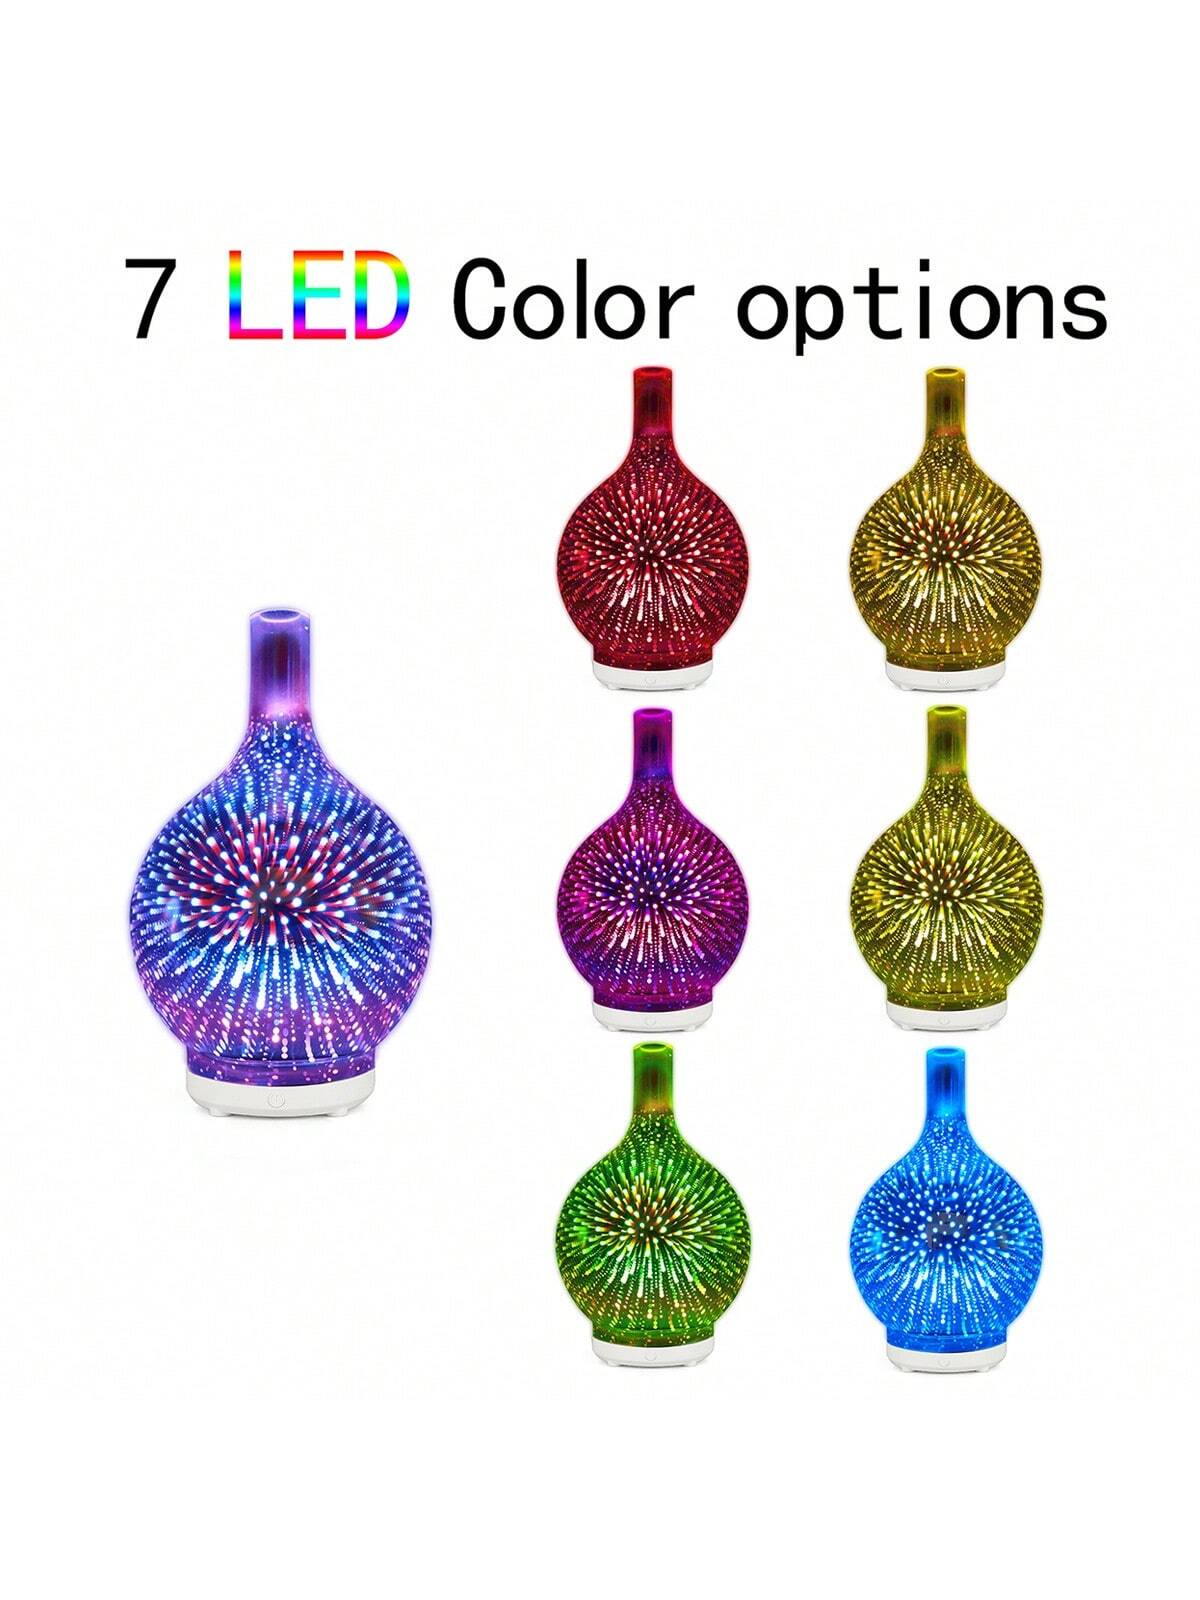 500ml Premium, Essential Oil Diffuser with Remote Control, 5 in 1 Ultrasonic Aromatherapy Fragrant Oil Humidifier Vaporizer, Timer and Auto-Off Safety Switch,Random black and white base.-glass color-1